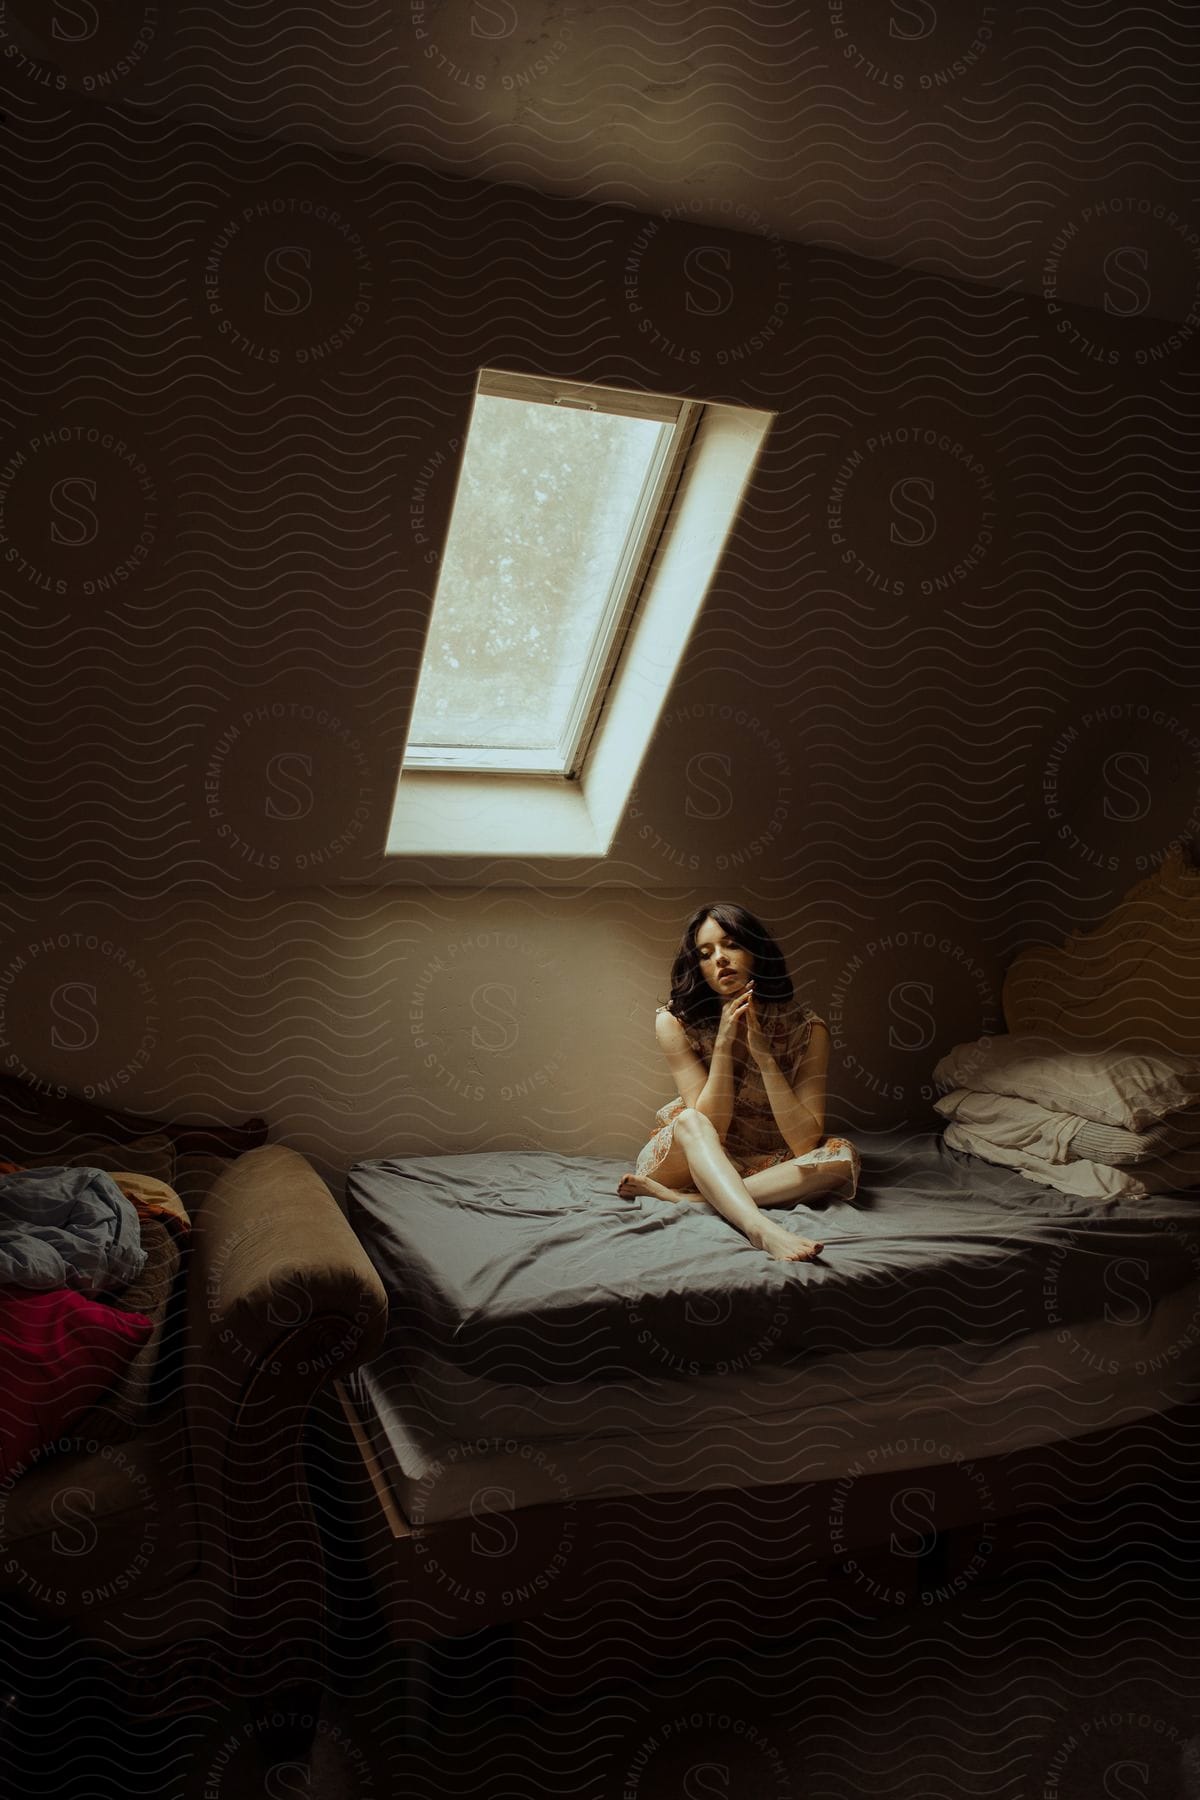 A woman sitting on a bed inside a house